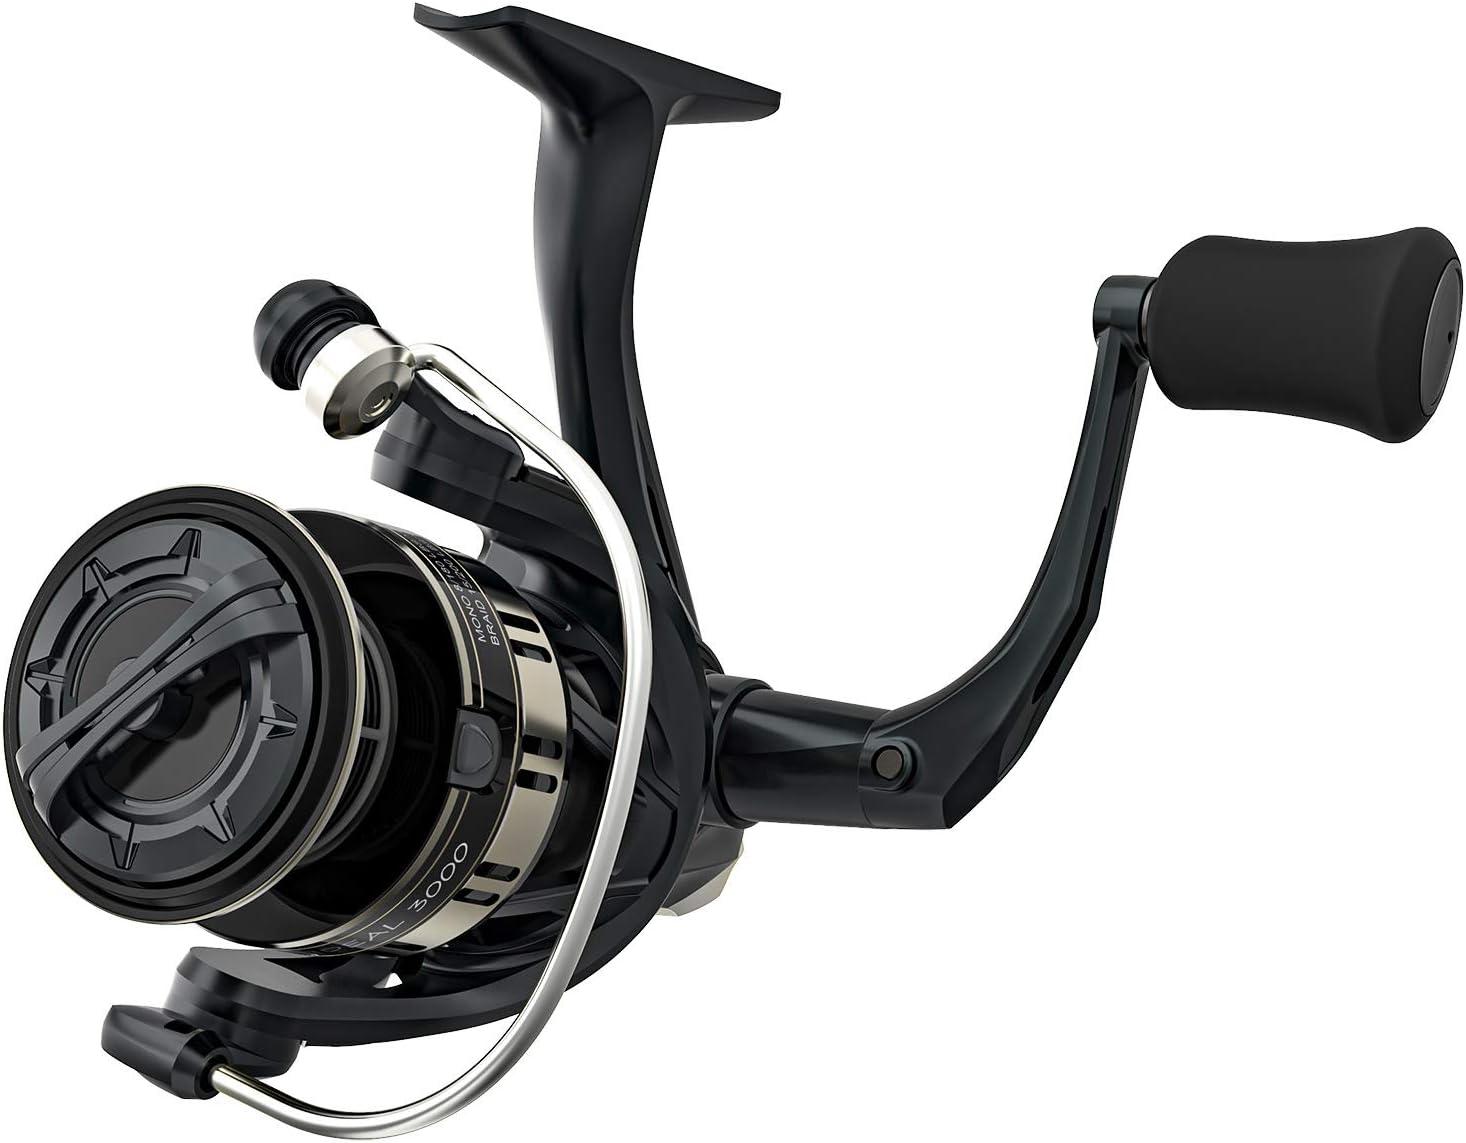 Strong Full Metal Body, Super Smooth Fishing Reel with 10 BB